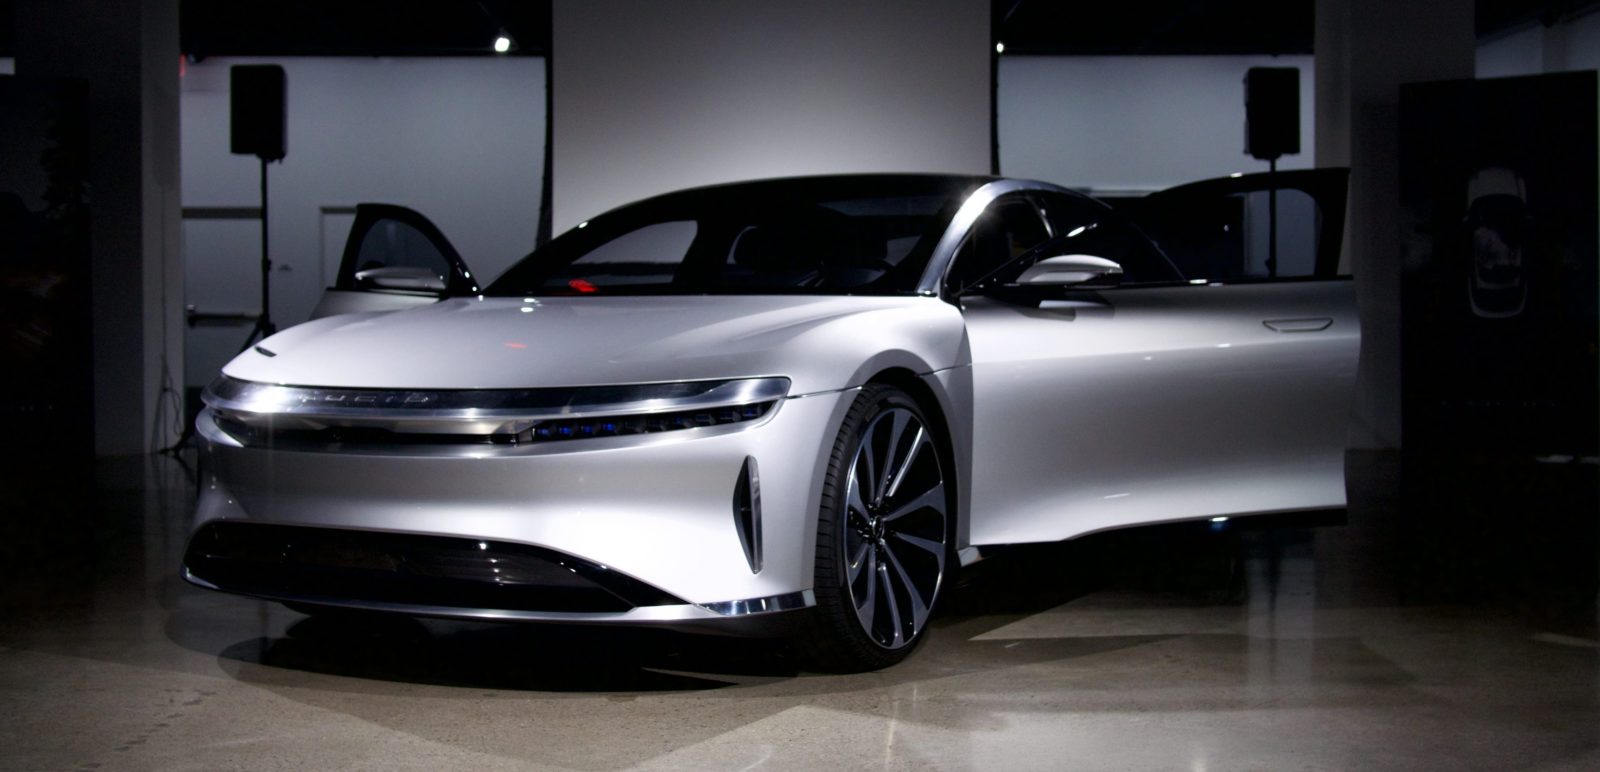 Lucid Motors announces aggressive $60,000 base price for its luxury all-electric sedan